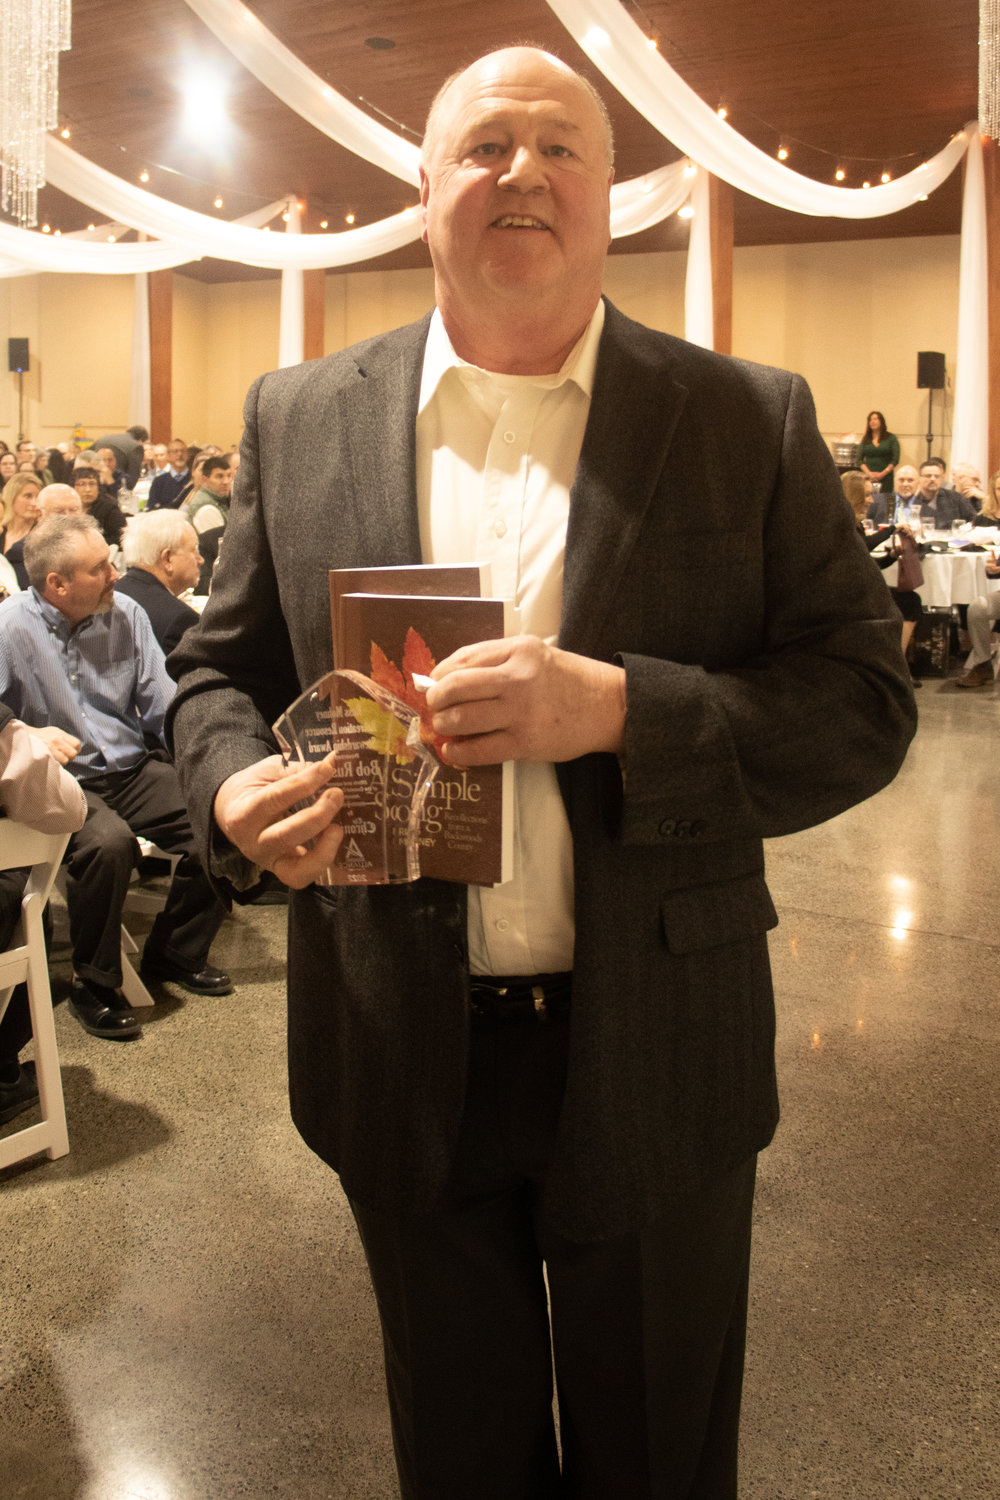 Adna resident and salmon conservationist Bob Russell poses with the Russ Mohney award as well as two copies of Mohney's book Friday night at the Economic Alliance of Lewis County's 40th annual banquet.